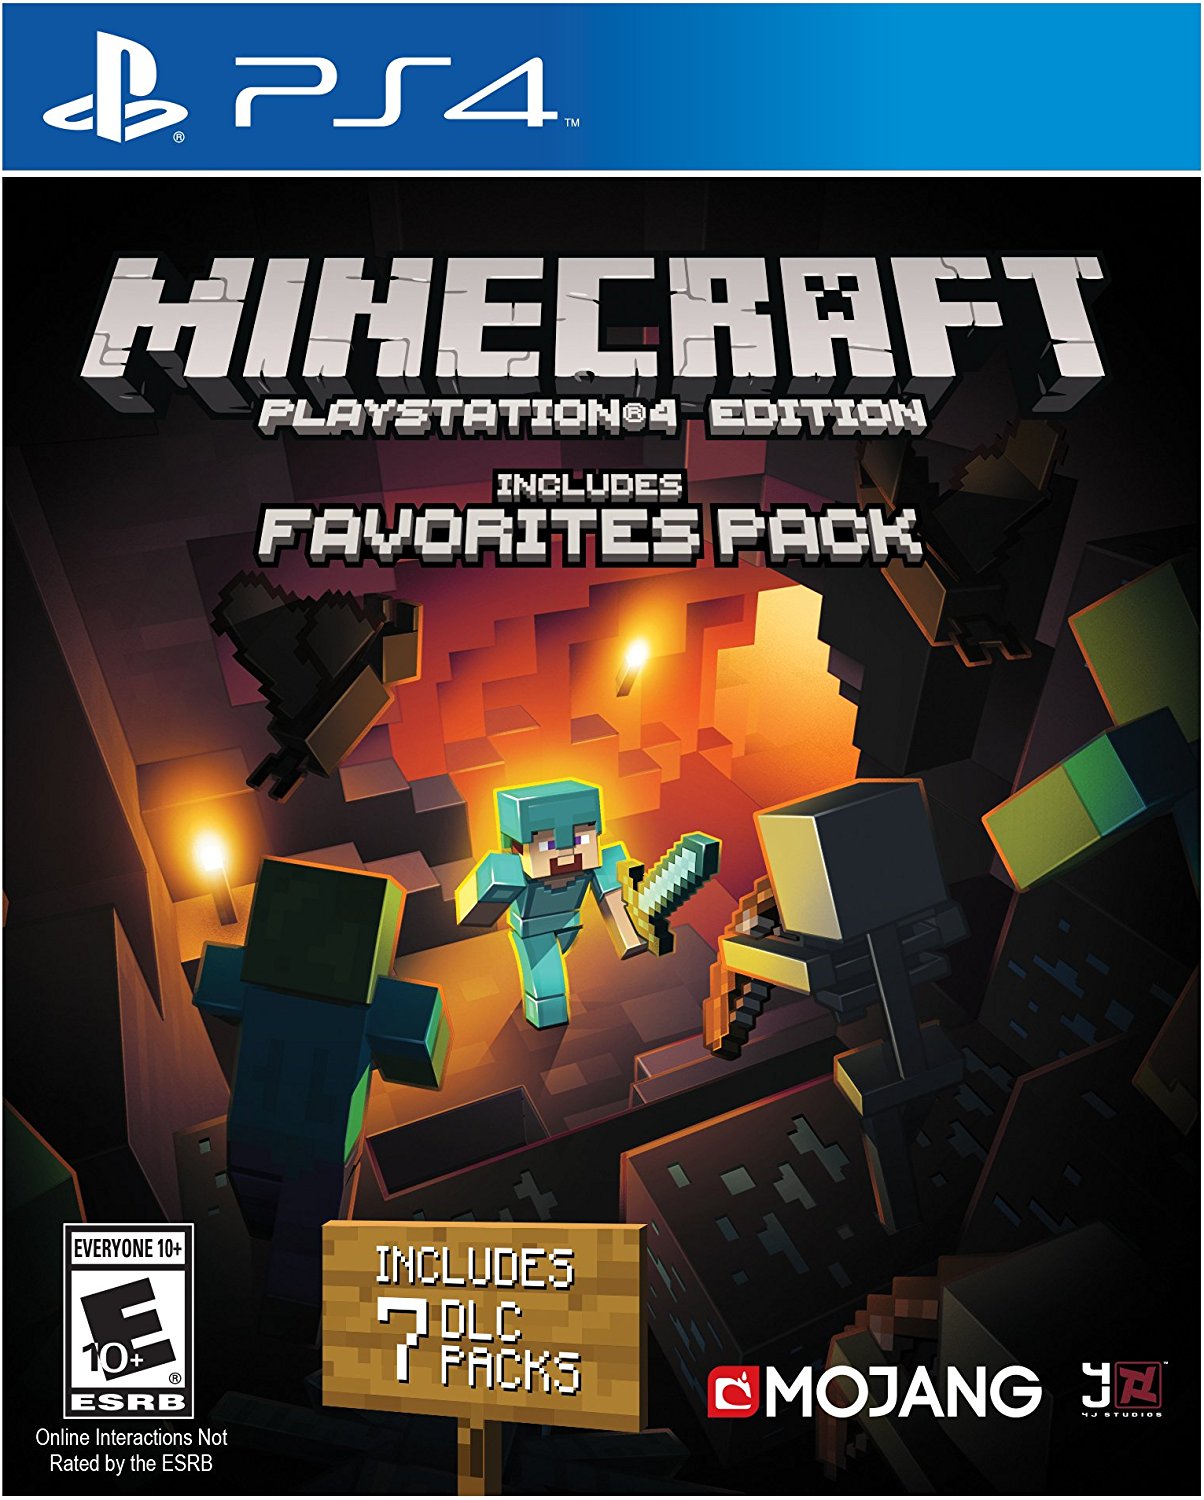 Minecraft Playstation 4 Edition Includes Favorites Pack 